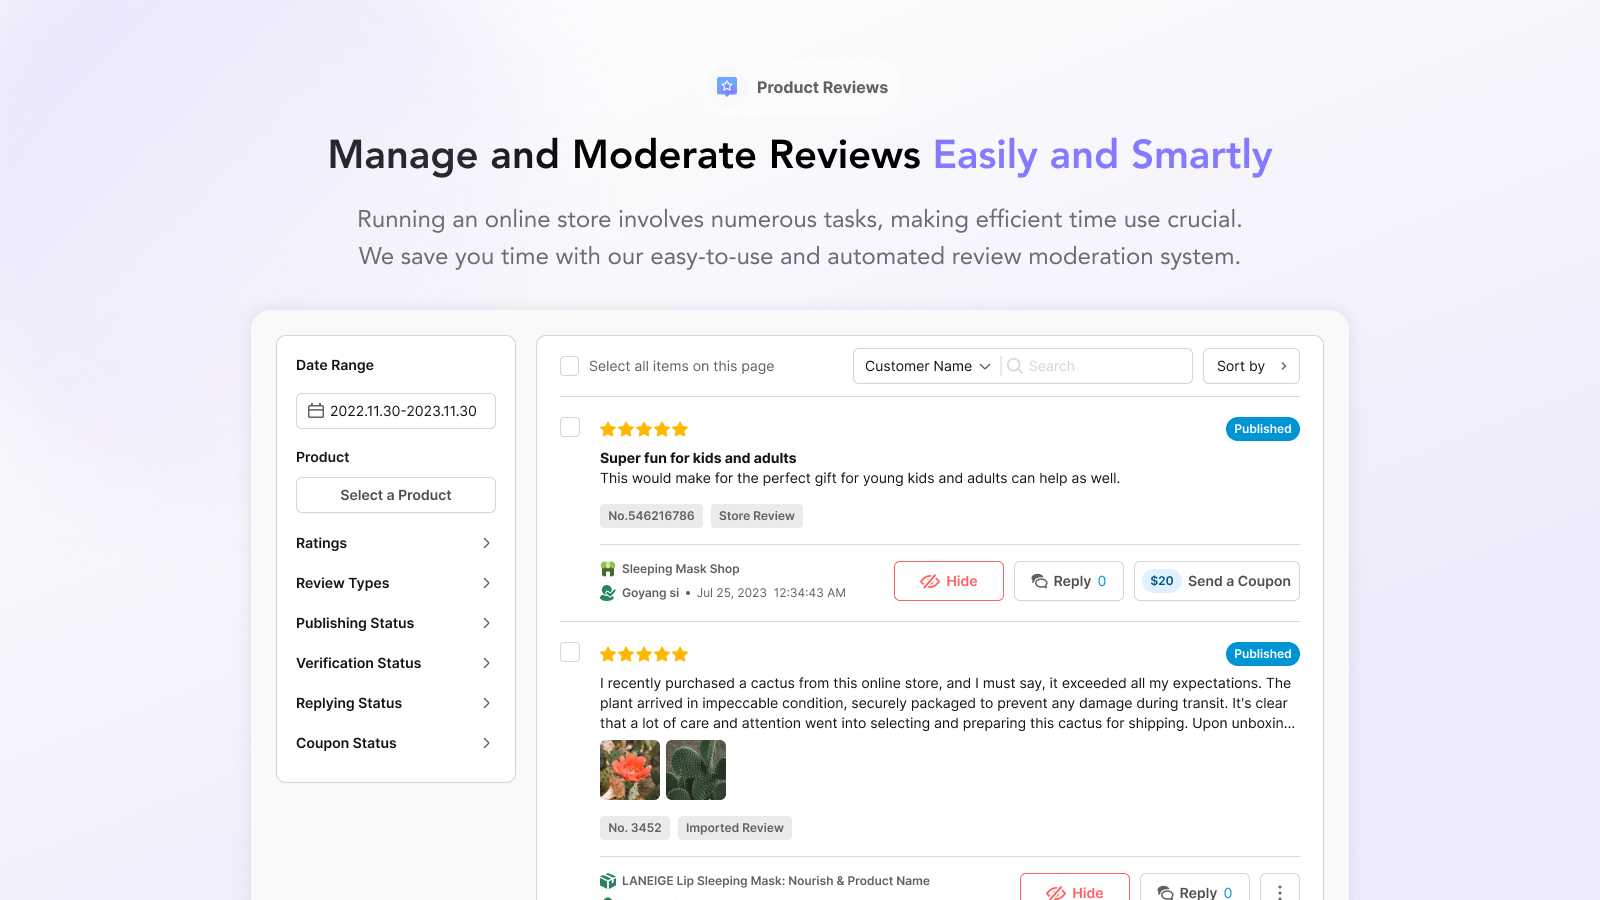 Manage and Moderate Reviews Easily and Smartly